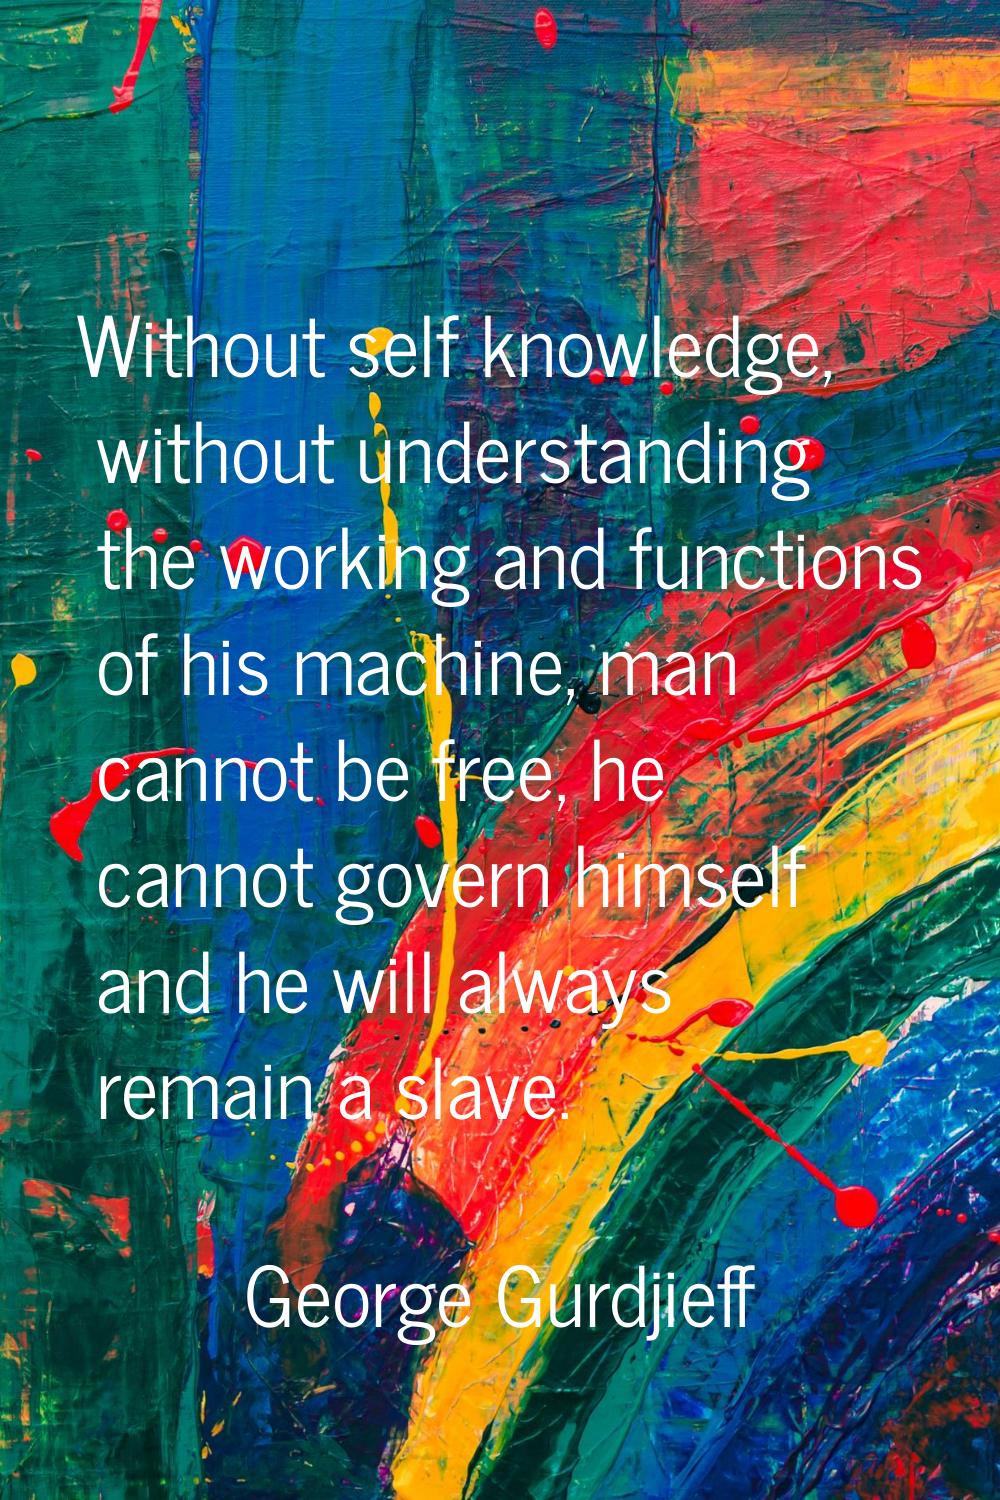 Without self knowledge, without understanding the working and functions of his machine, man cannot 